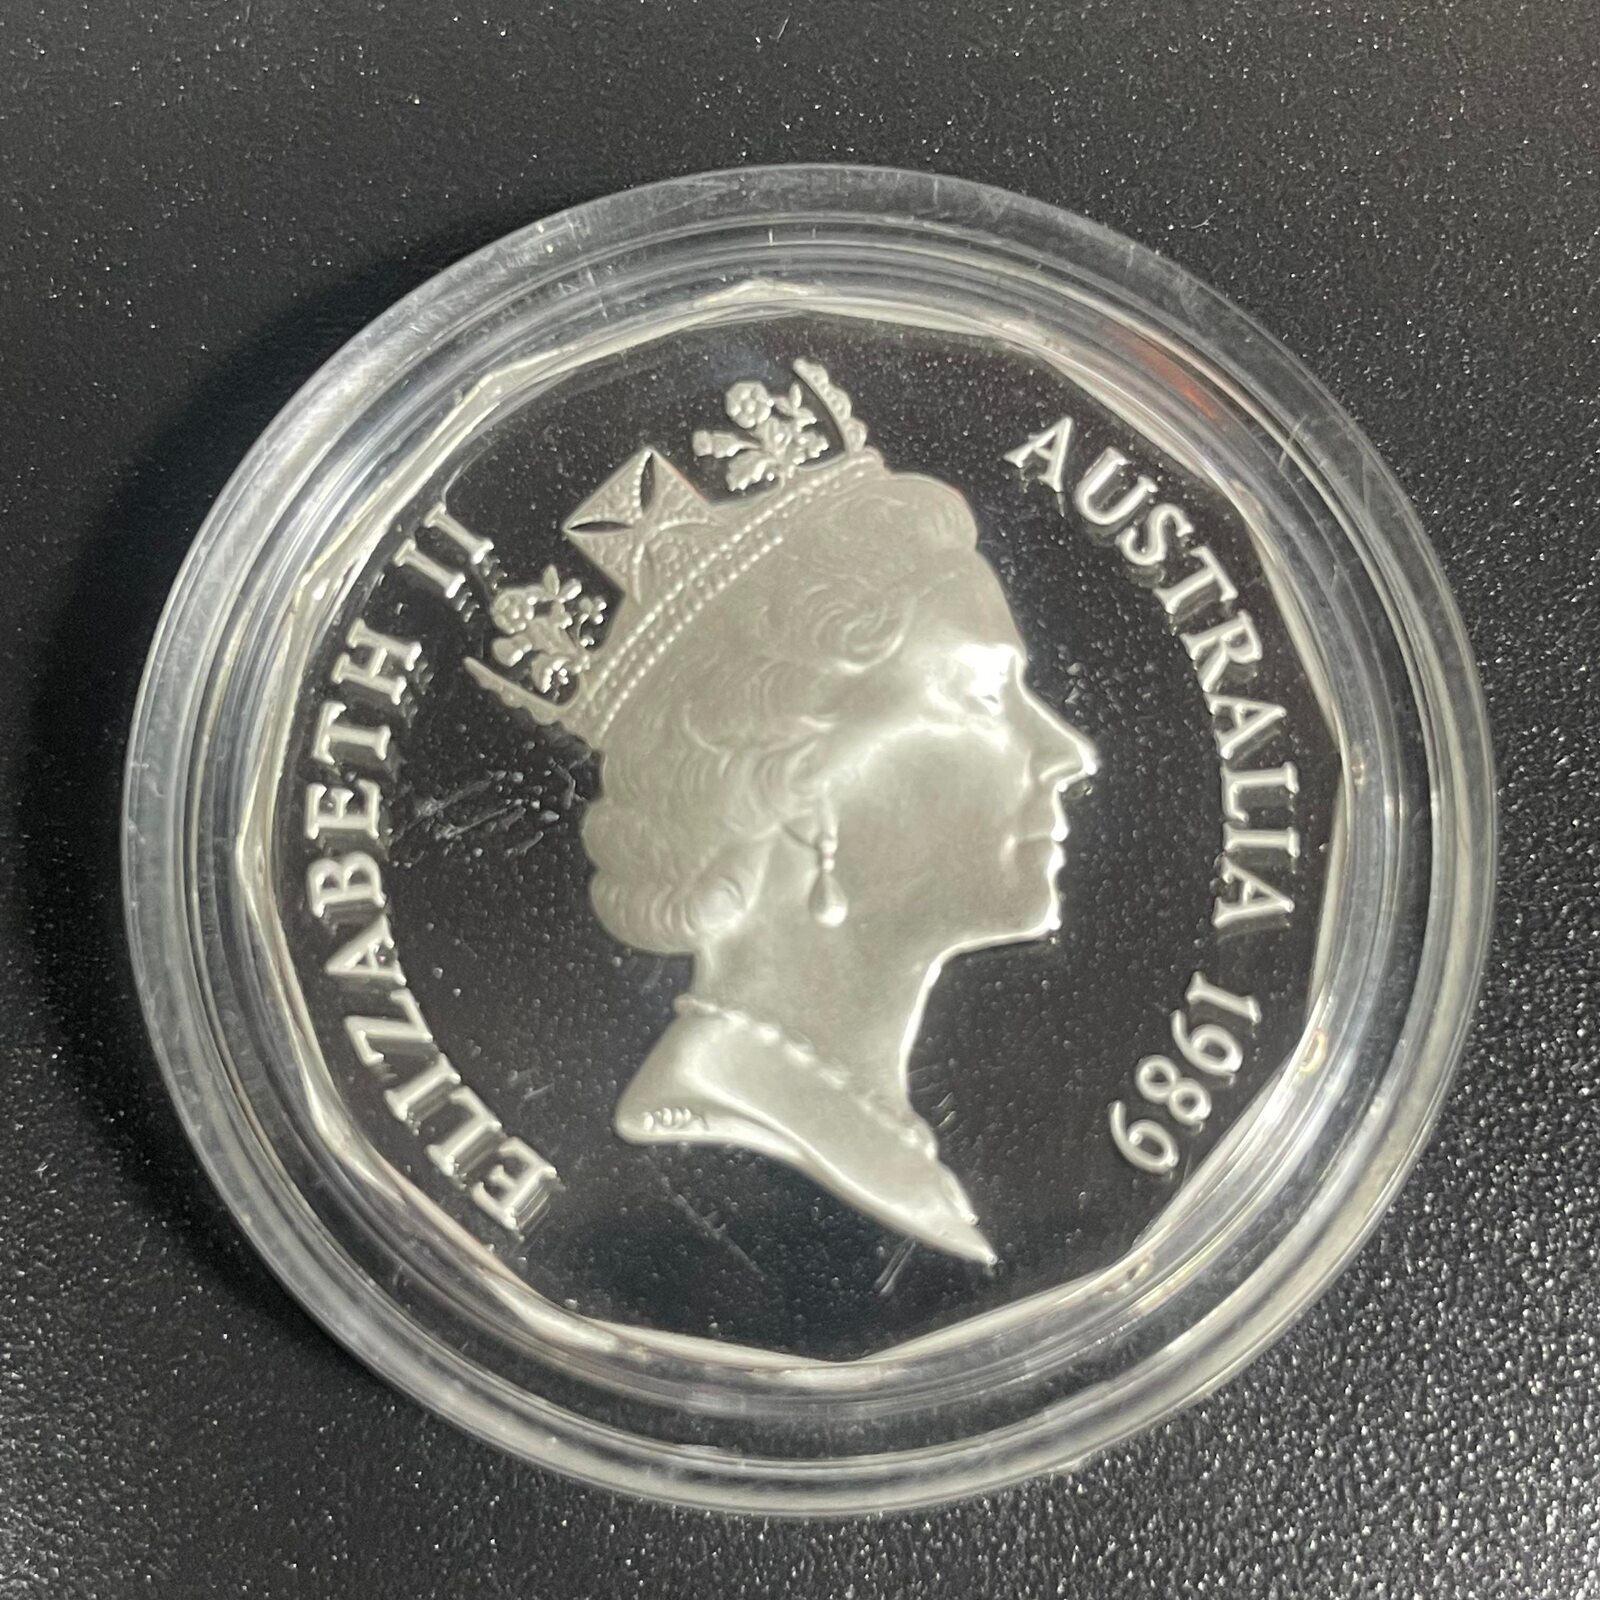 1989 50c Captain Cook - Masterpieces in Silver Coin In Capsule